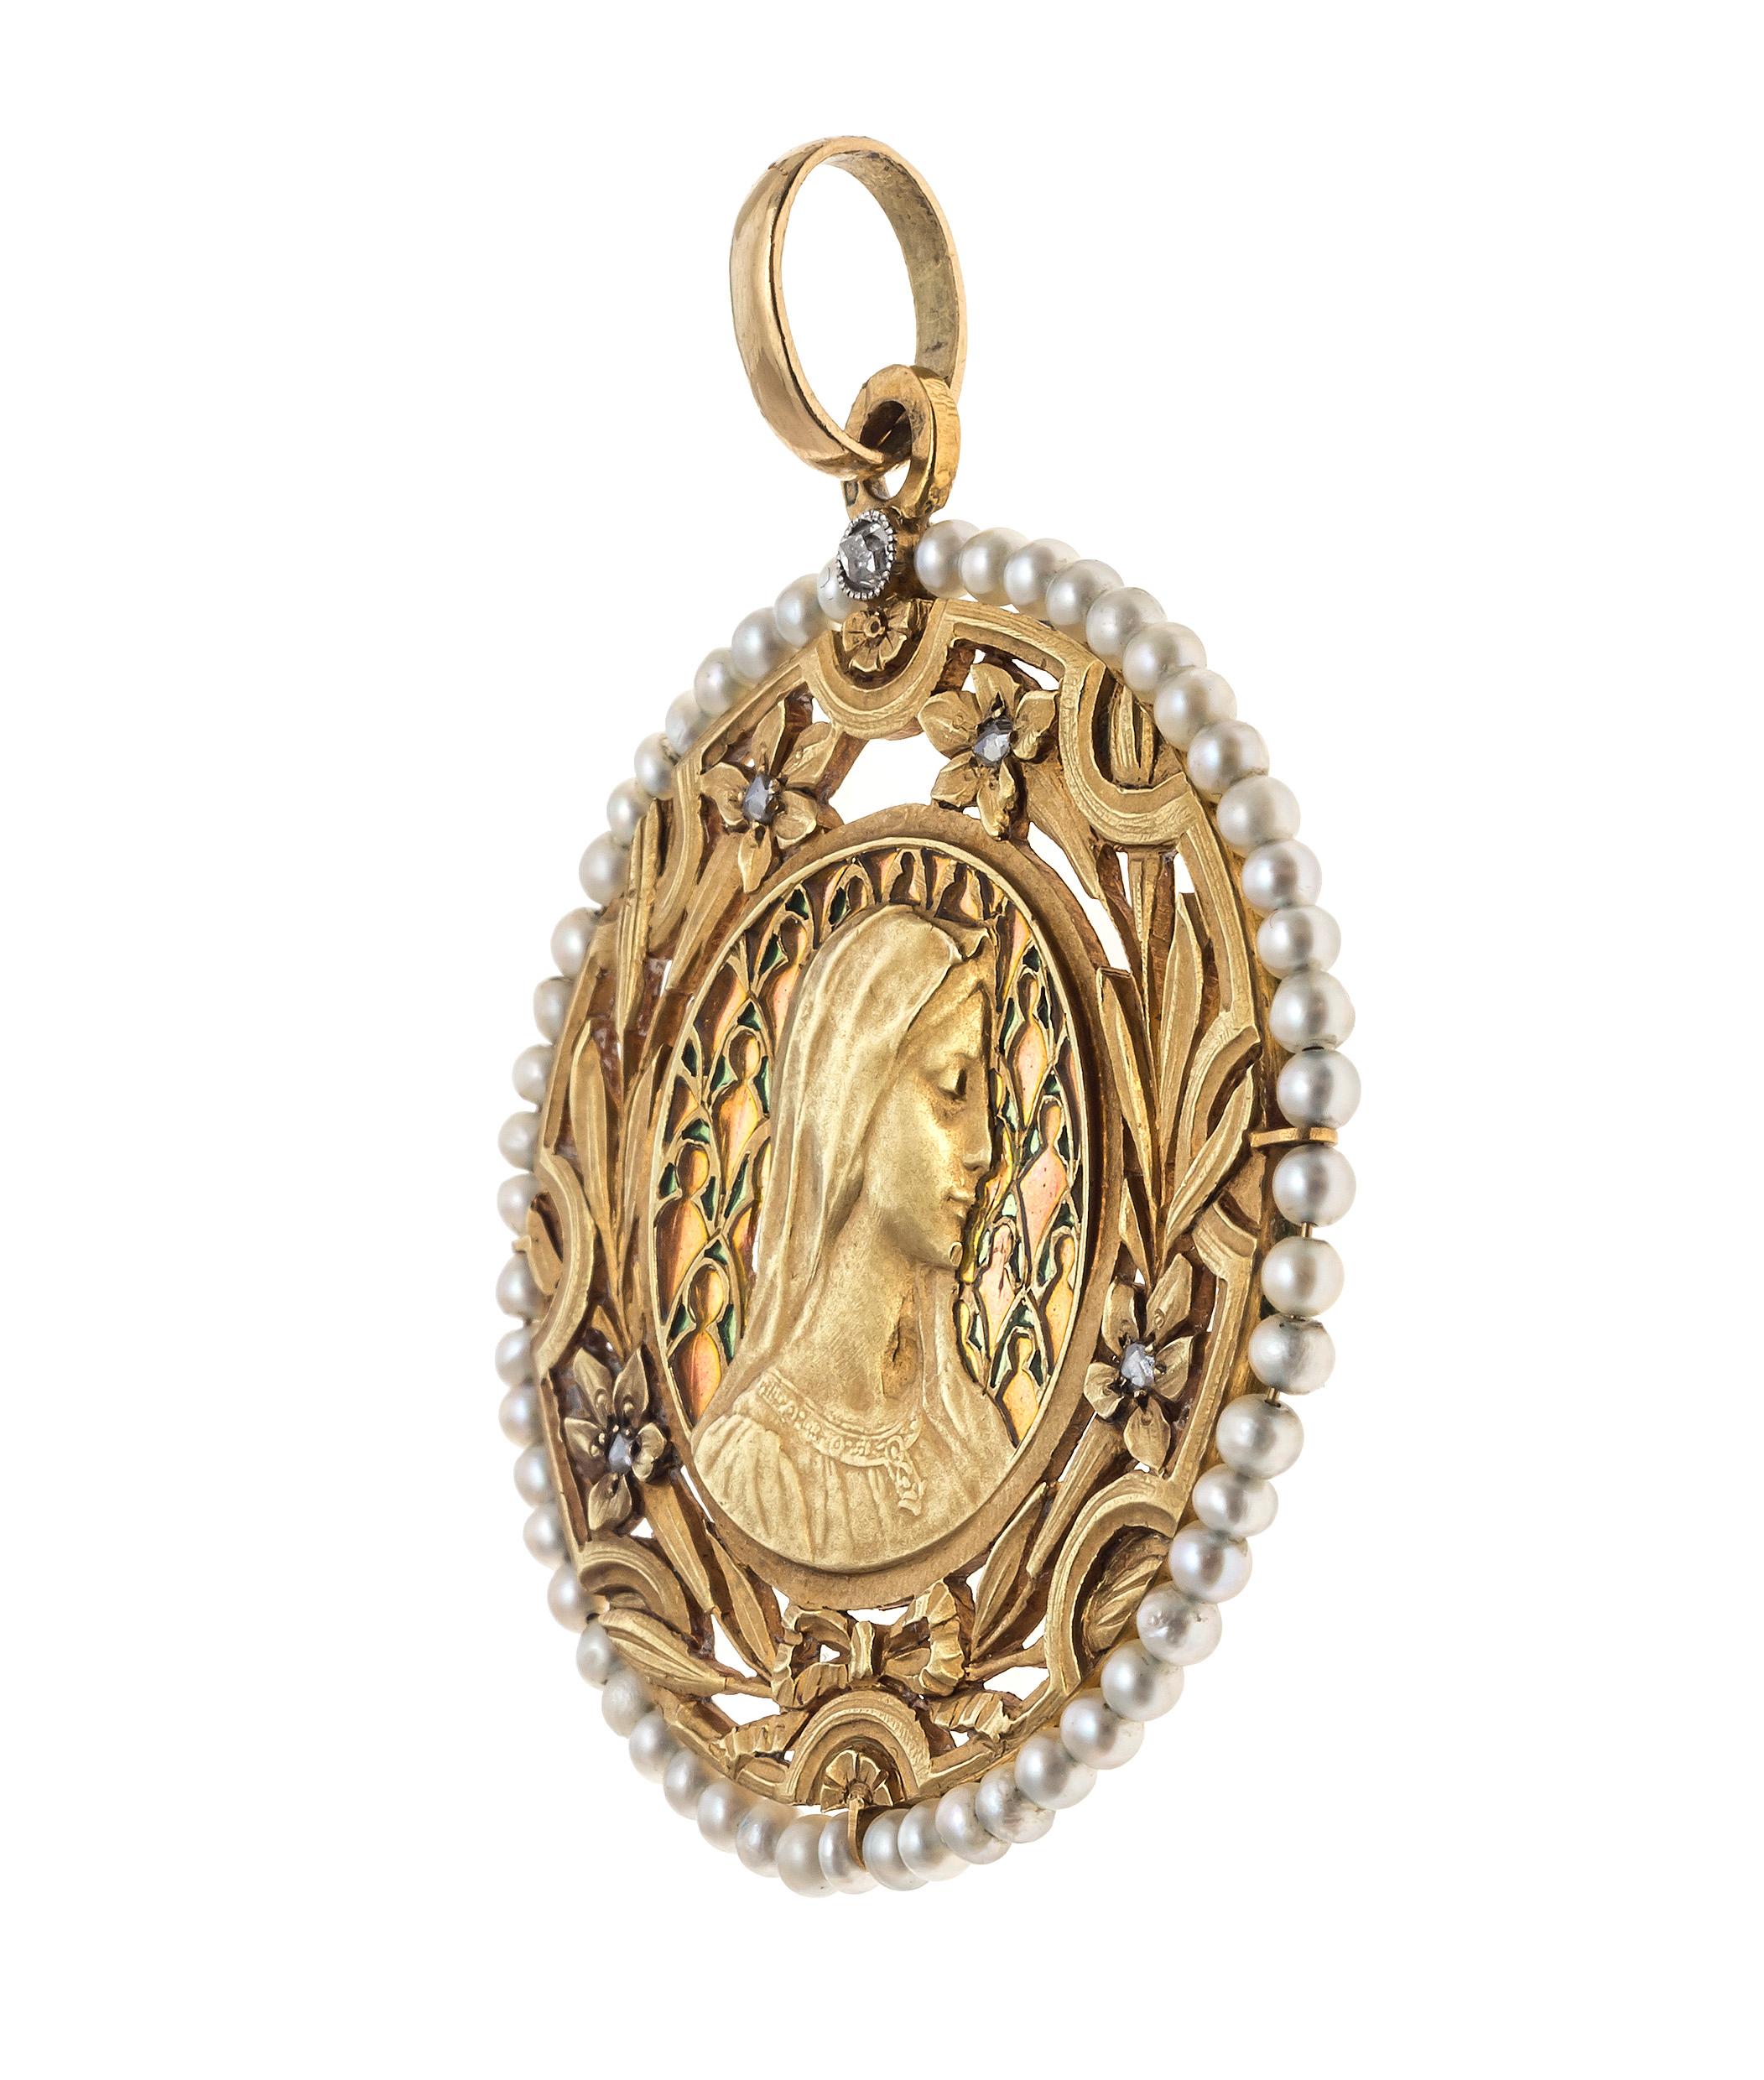 This beautiful Art Nouveau pendant shows a relief portrait of the Virgin Mary amidst a fine plique à jour enamel halo of green ornaments before an orange background. The image of Mary is surrounded by a fine cut out frame, decorated with a chiselled